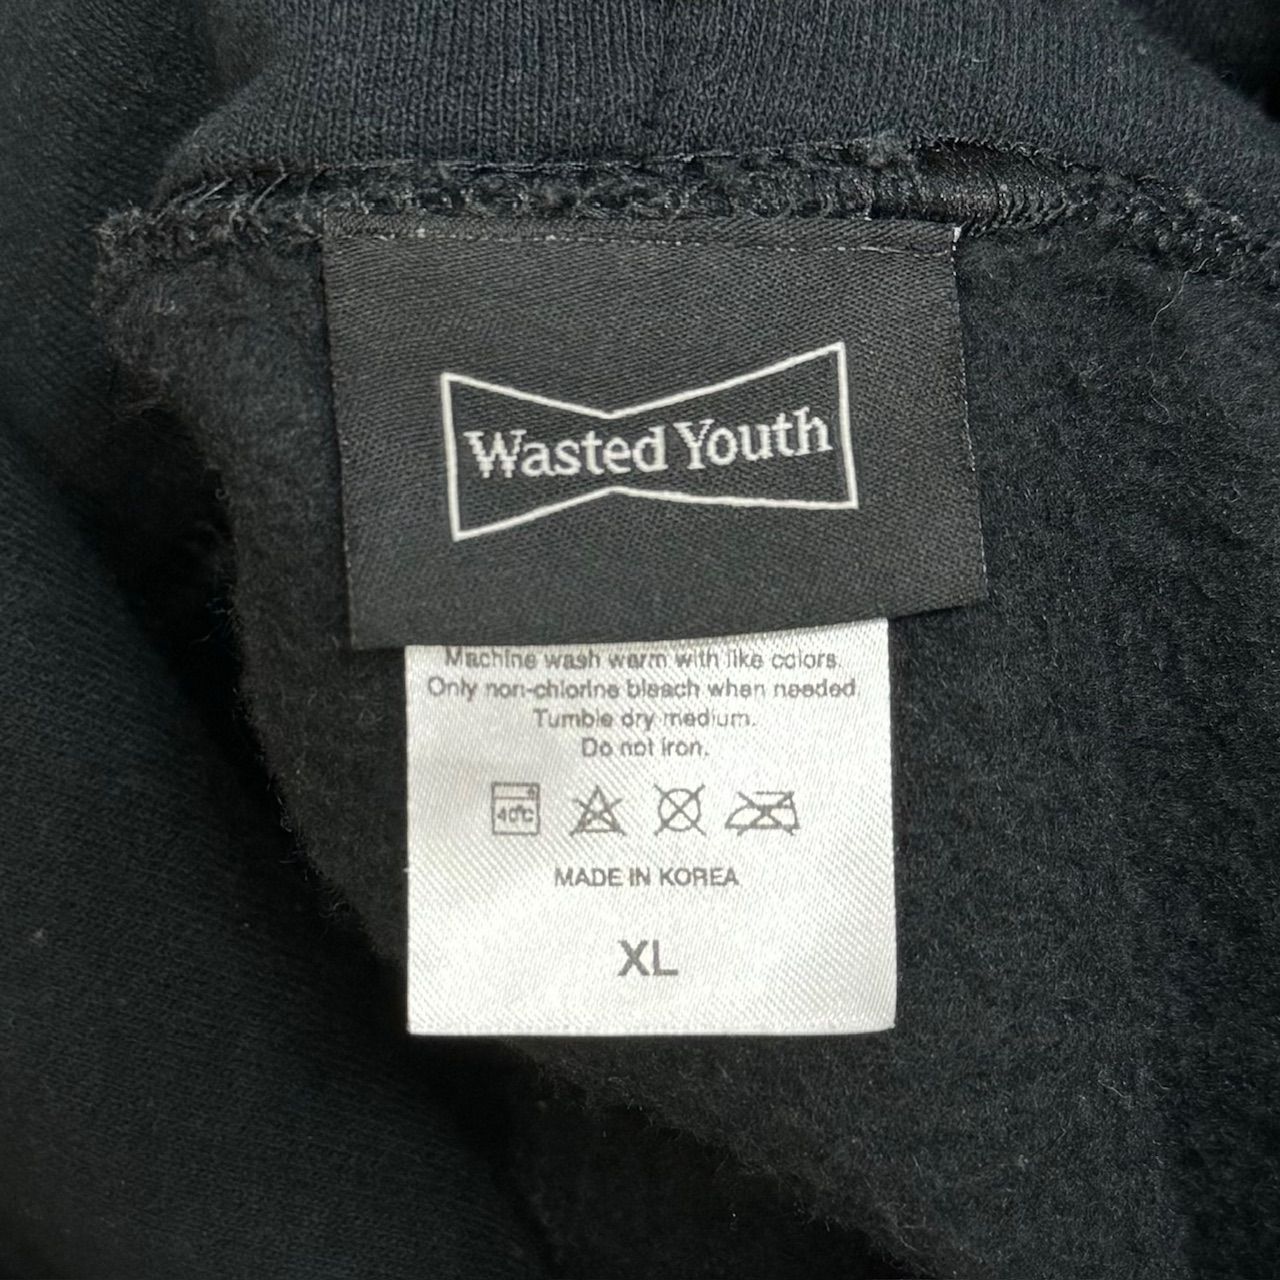 WASTED YOUTH Verdy RARE PANTHER HOODIE コラボ バラ プリント スウェット パーカー ウエステットユーズ レアパンサー XL 68405A2